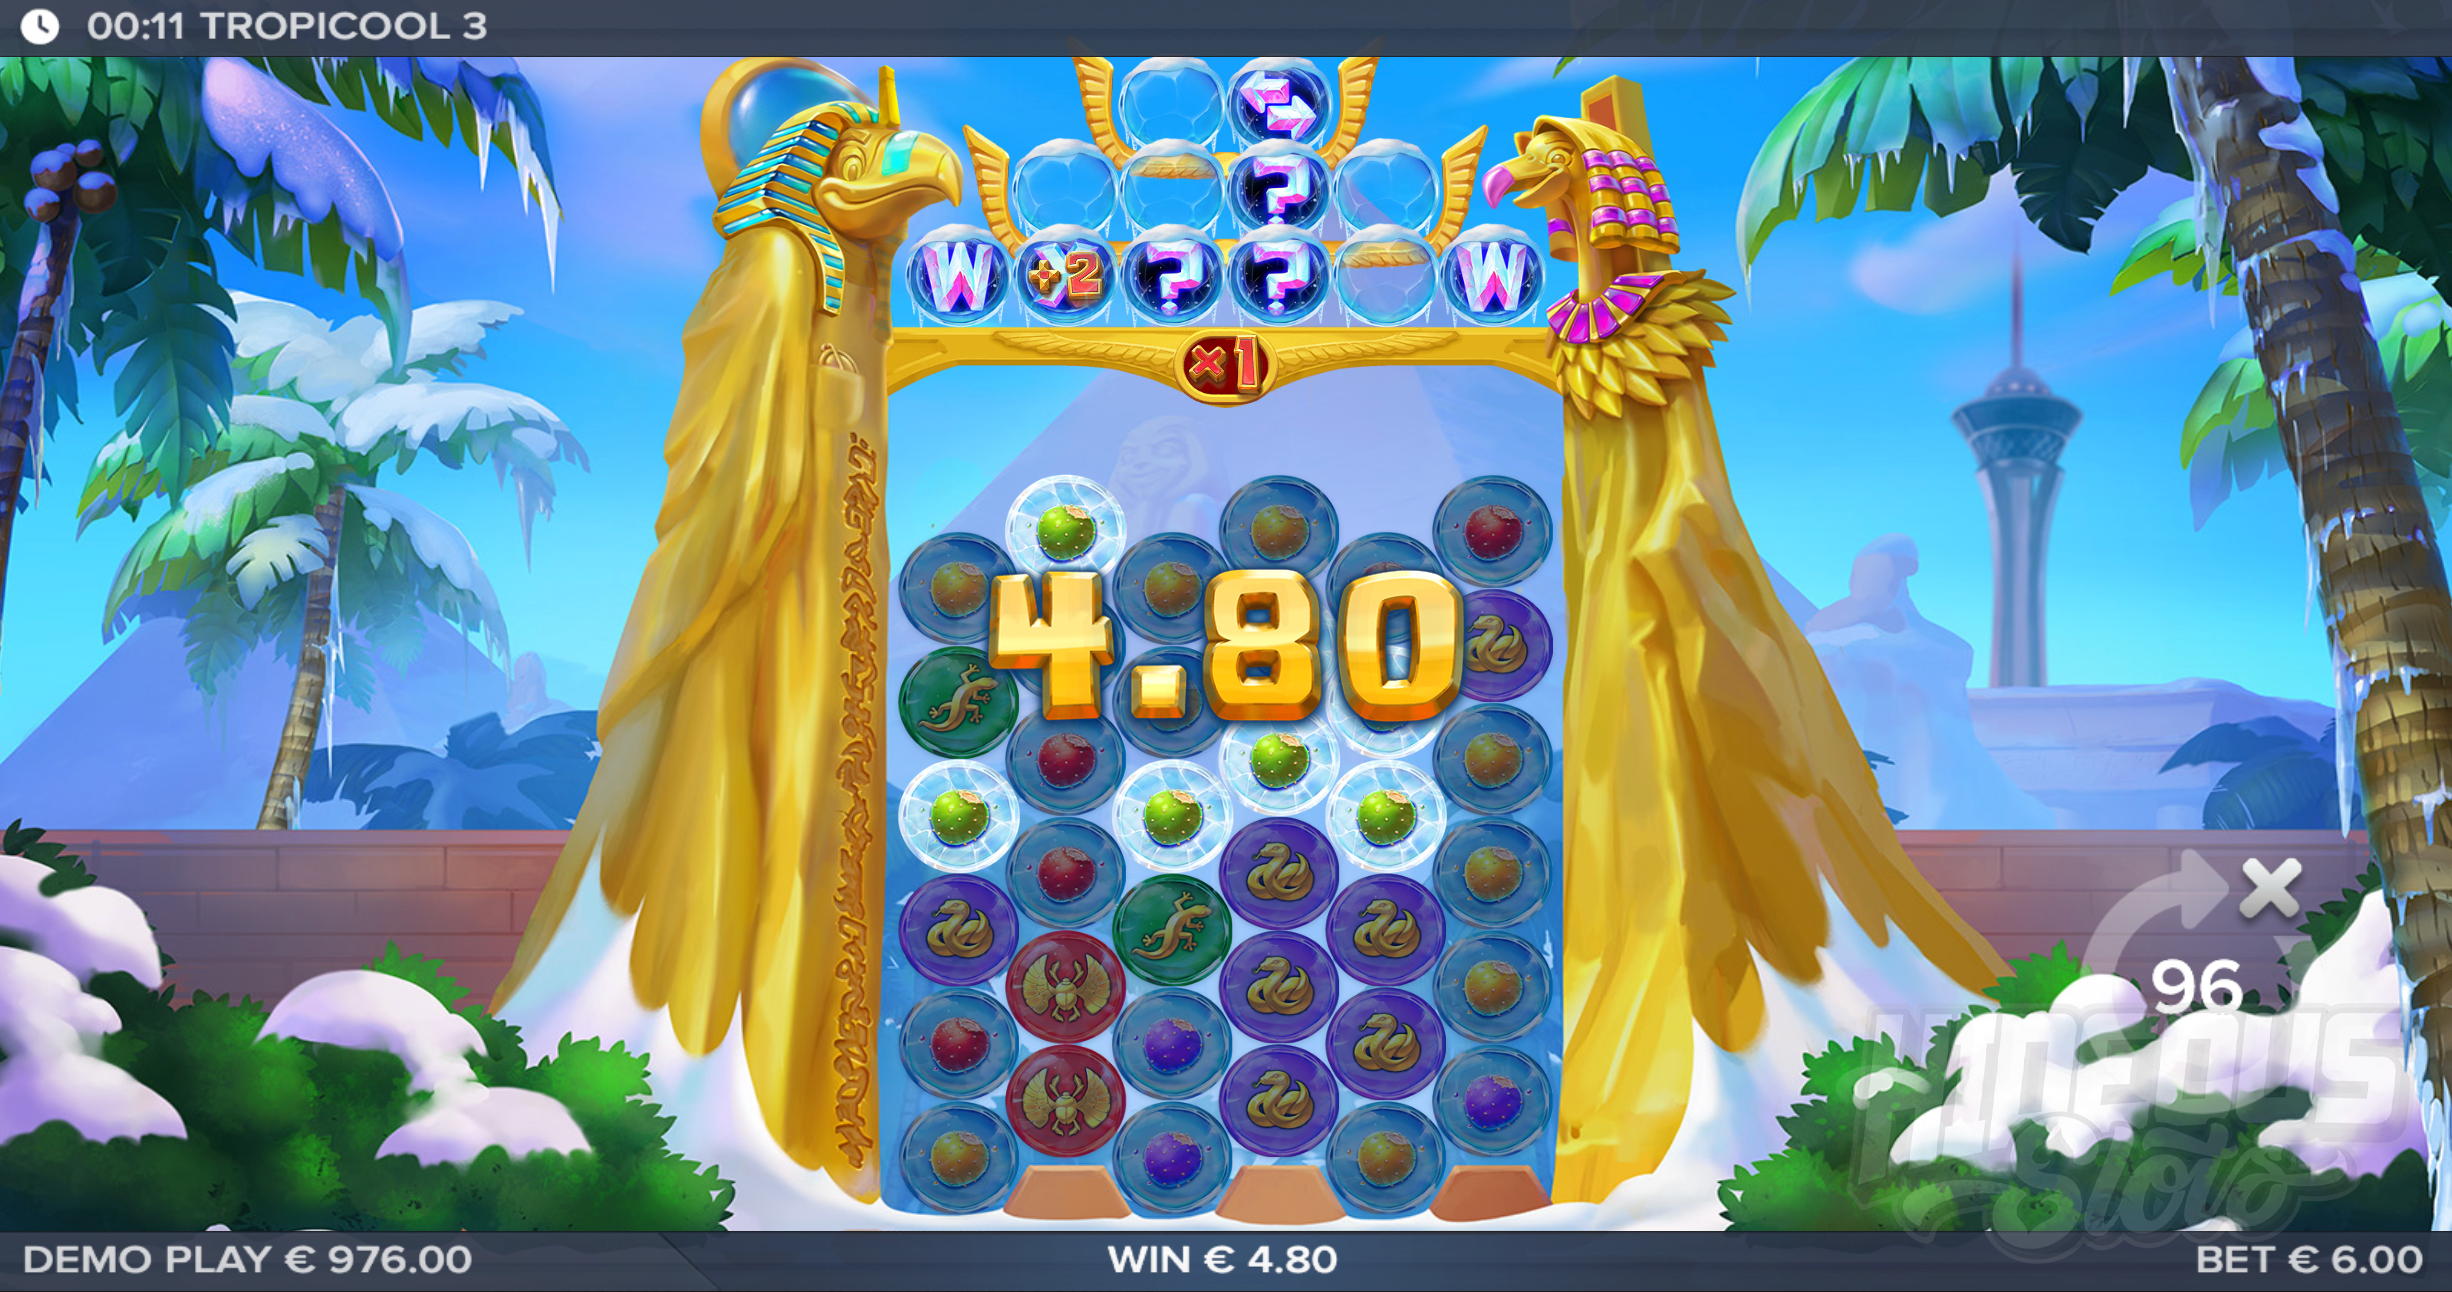 Tropicool 3 Offers Players 46,656 Ways to Win